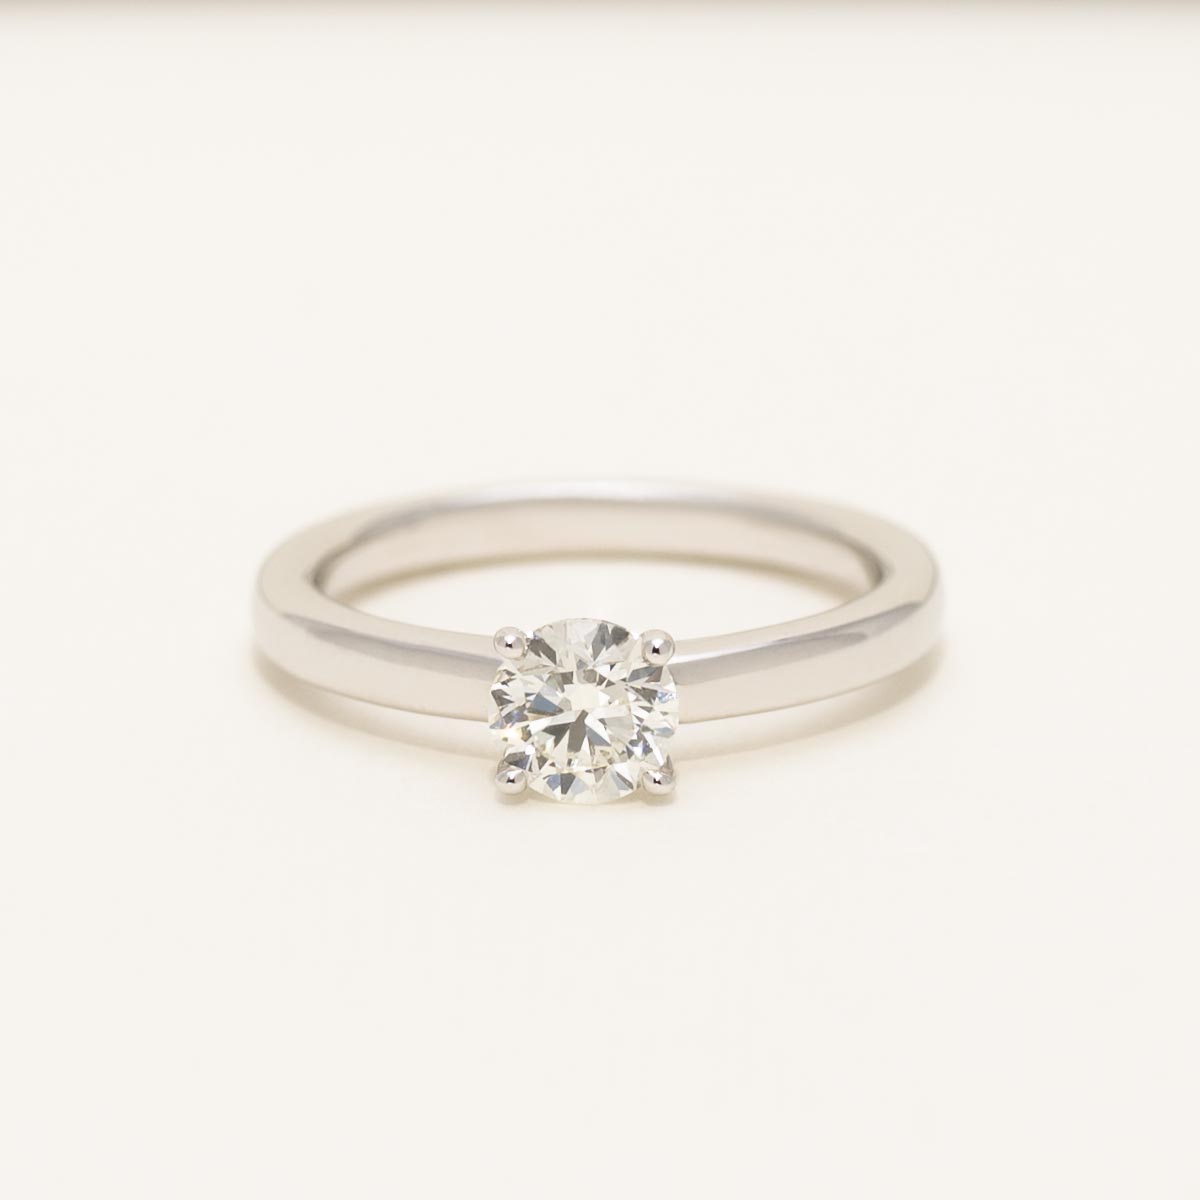 Diamond Solitaire Engagement Ring in 14kt White Gold (3/4ct)